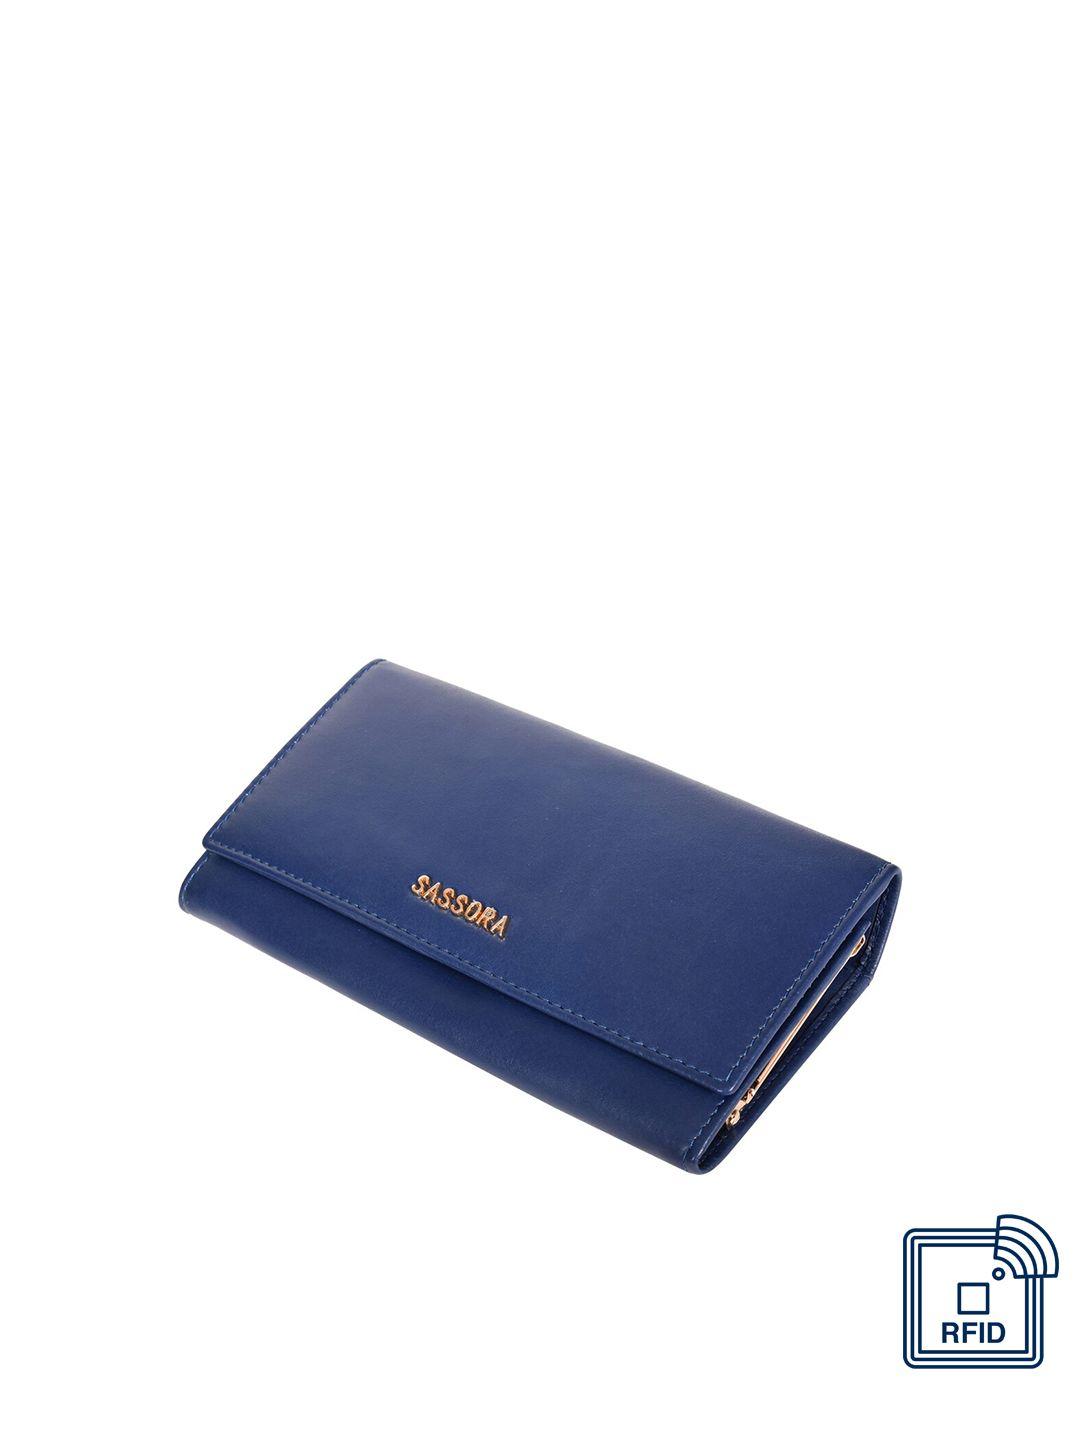 sassora women solid leather rfid two fold wallet